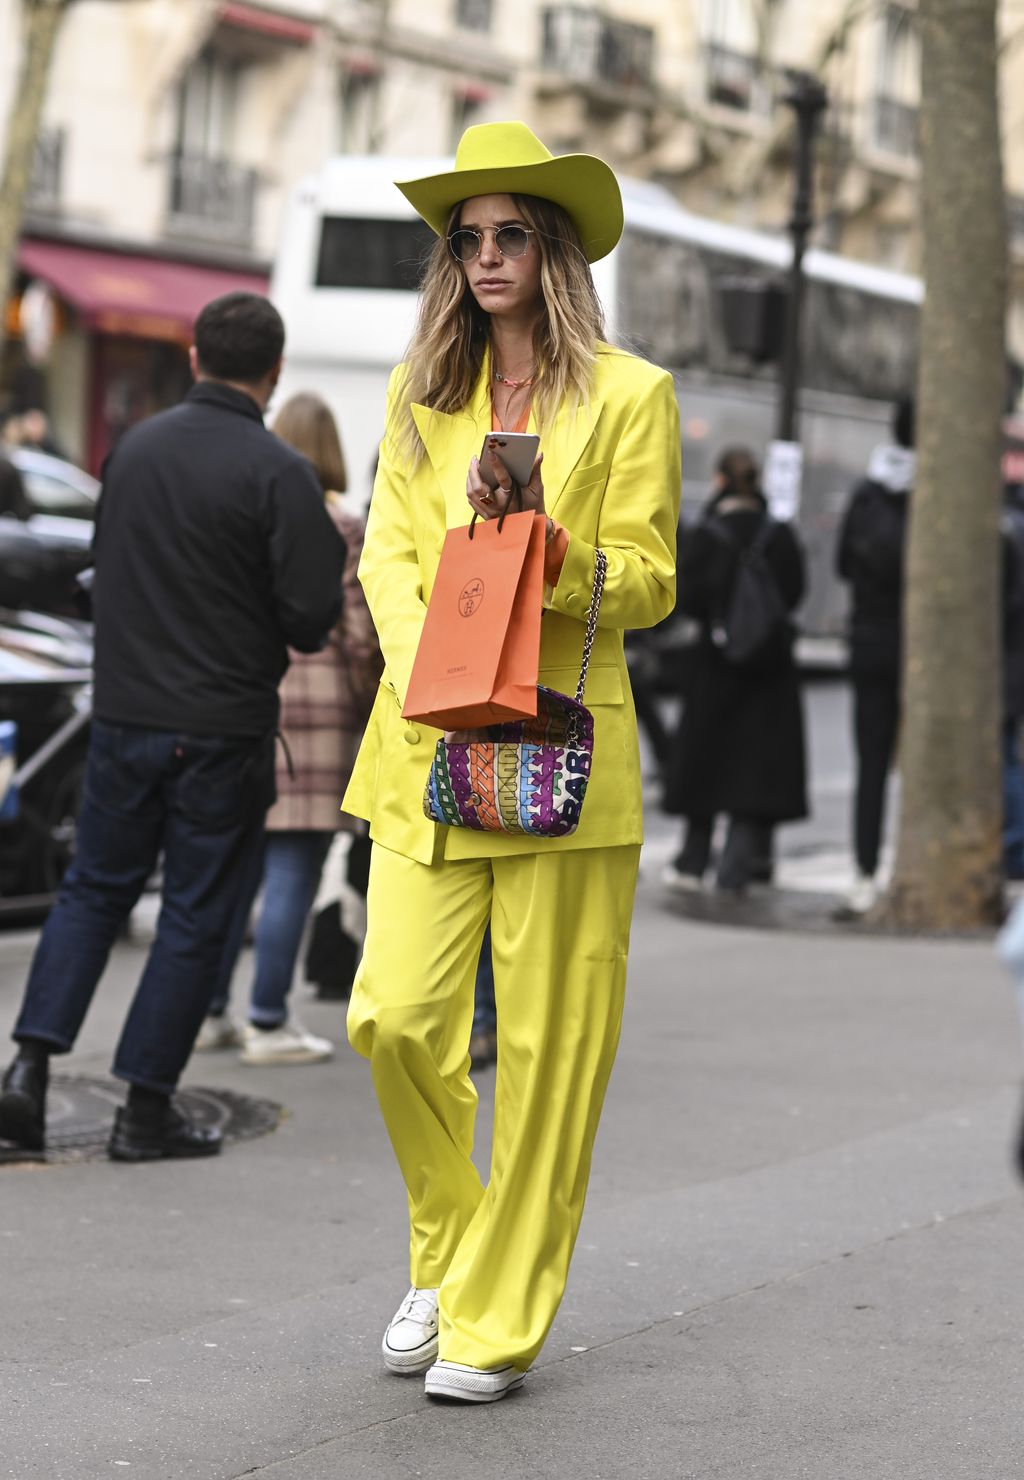 PARIS, FRANCE - MARCH 05: A guest is seen wearing a yellow suit and lime green cowboy hat outside the Hermes show during Paris Fashion Week A/W 2022 on March 05, 2022 in Paris, France. (Photo by Daniel Zuchnik/Getty Images)